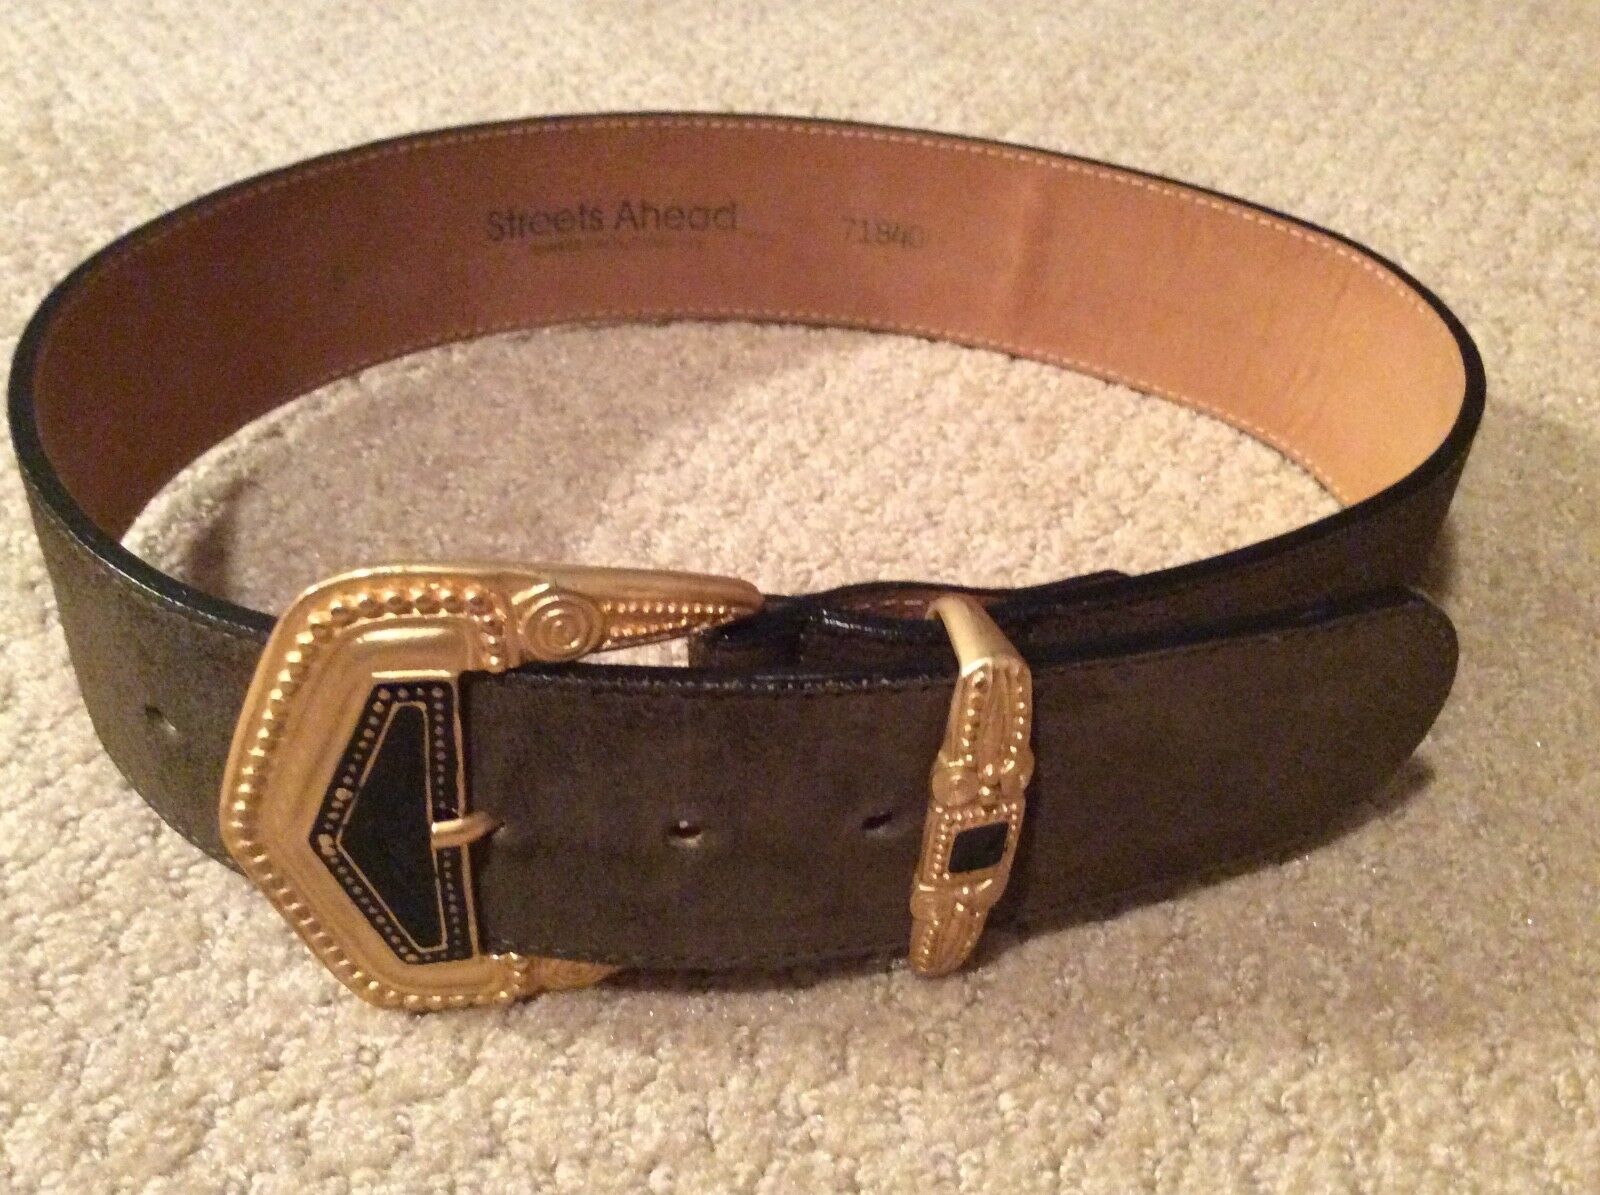 Streets Ahead Raleigh Mall Brown suede belt with ornate buckle s gold & heavy Max 90% OFF